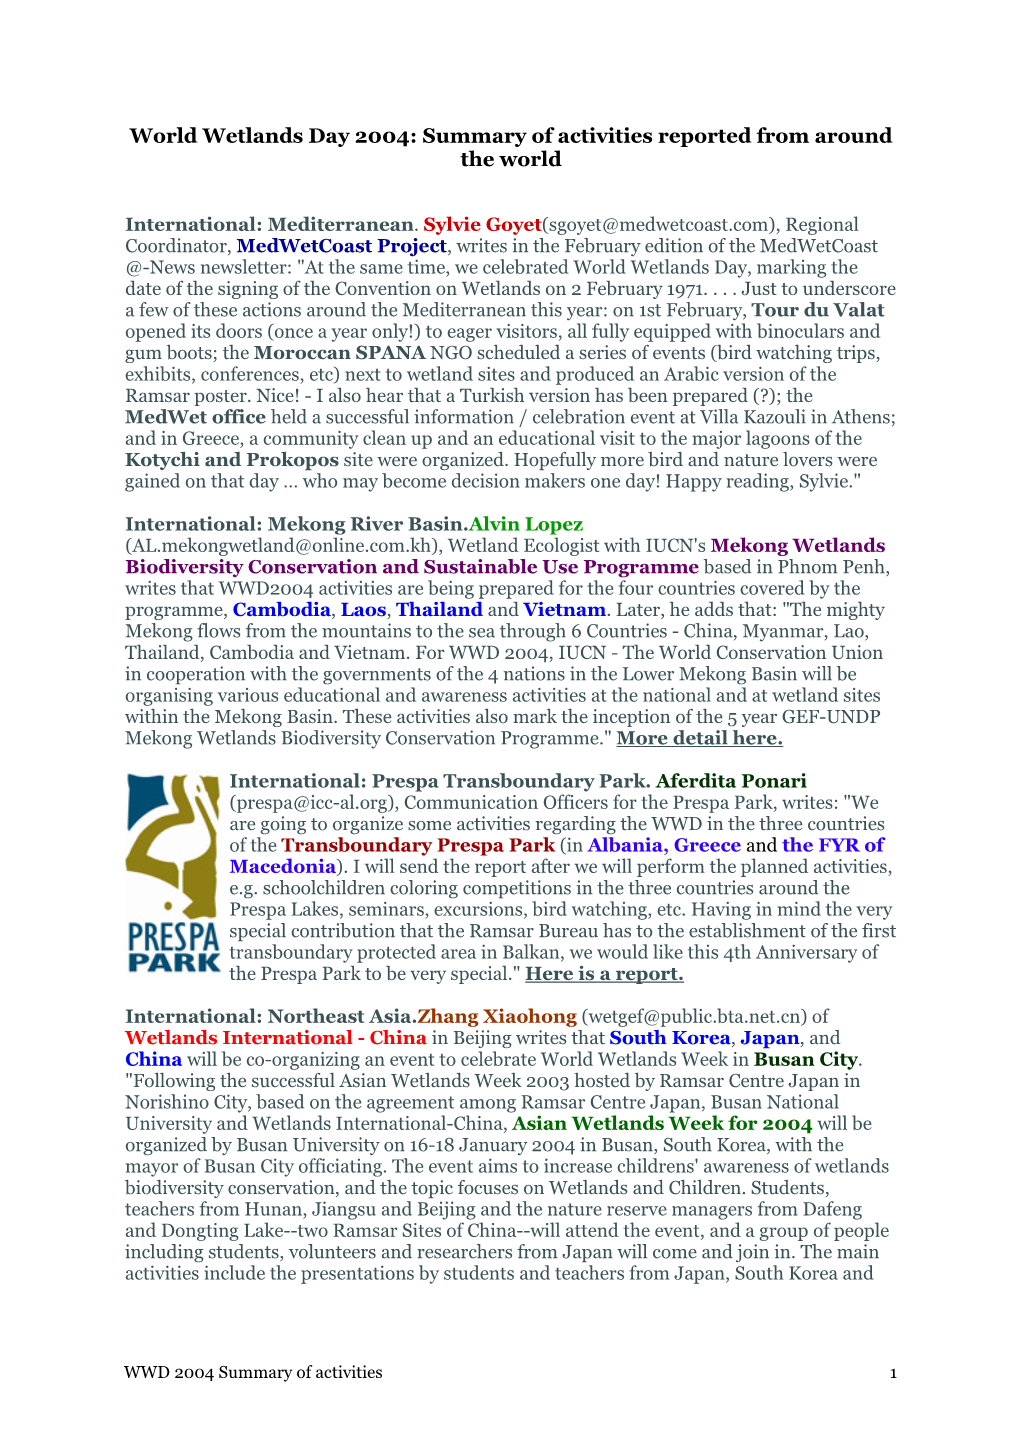 World Wetlands Day 2004: Summary of Activities Reported from Around the World